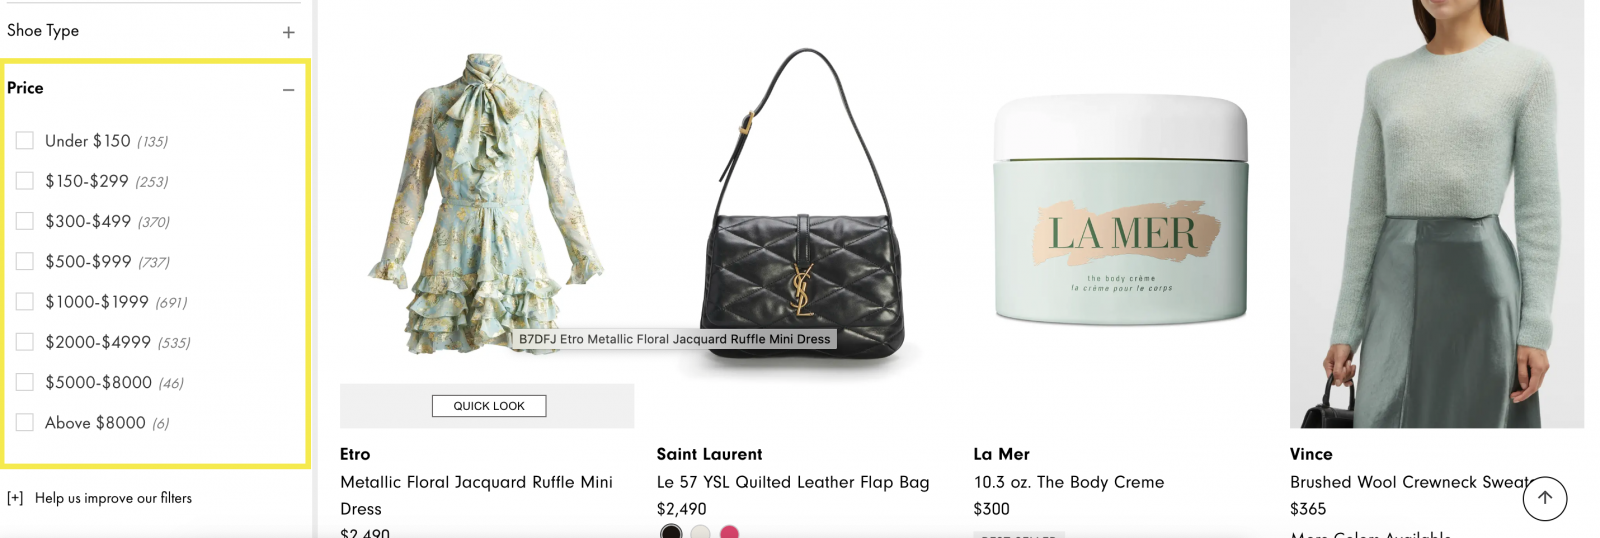 Filter the results on the Neiman Marcus website to fit within your shopping budget.